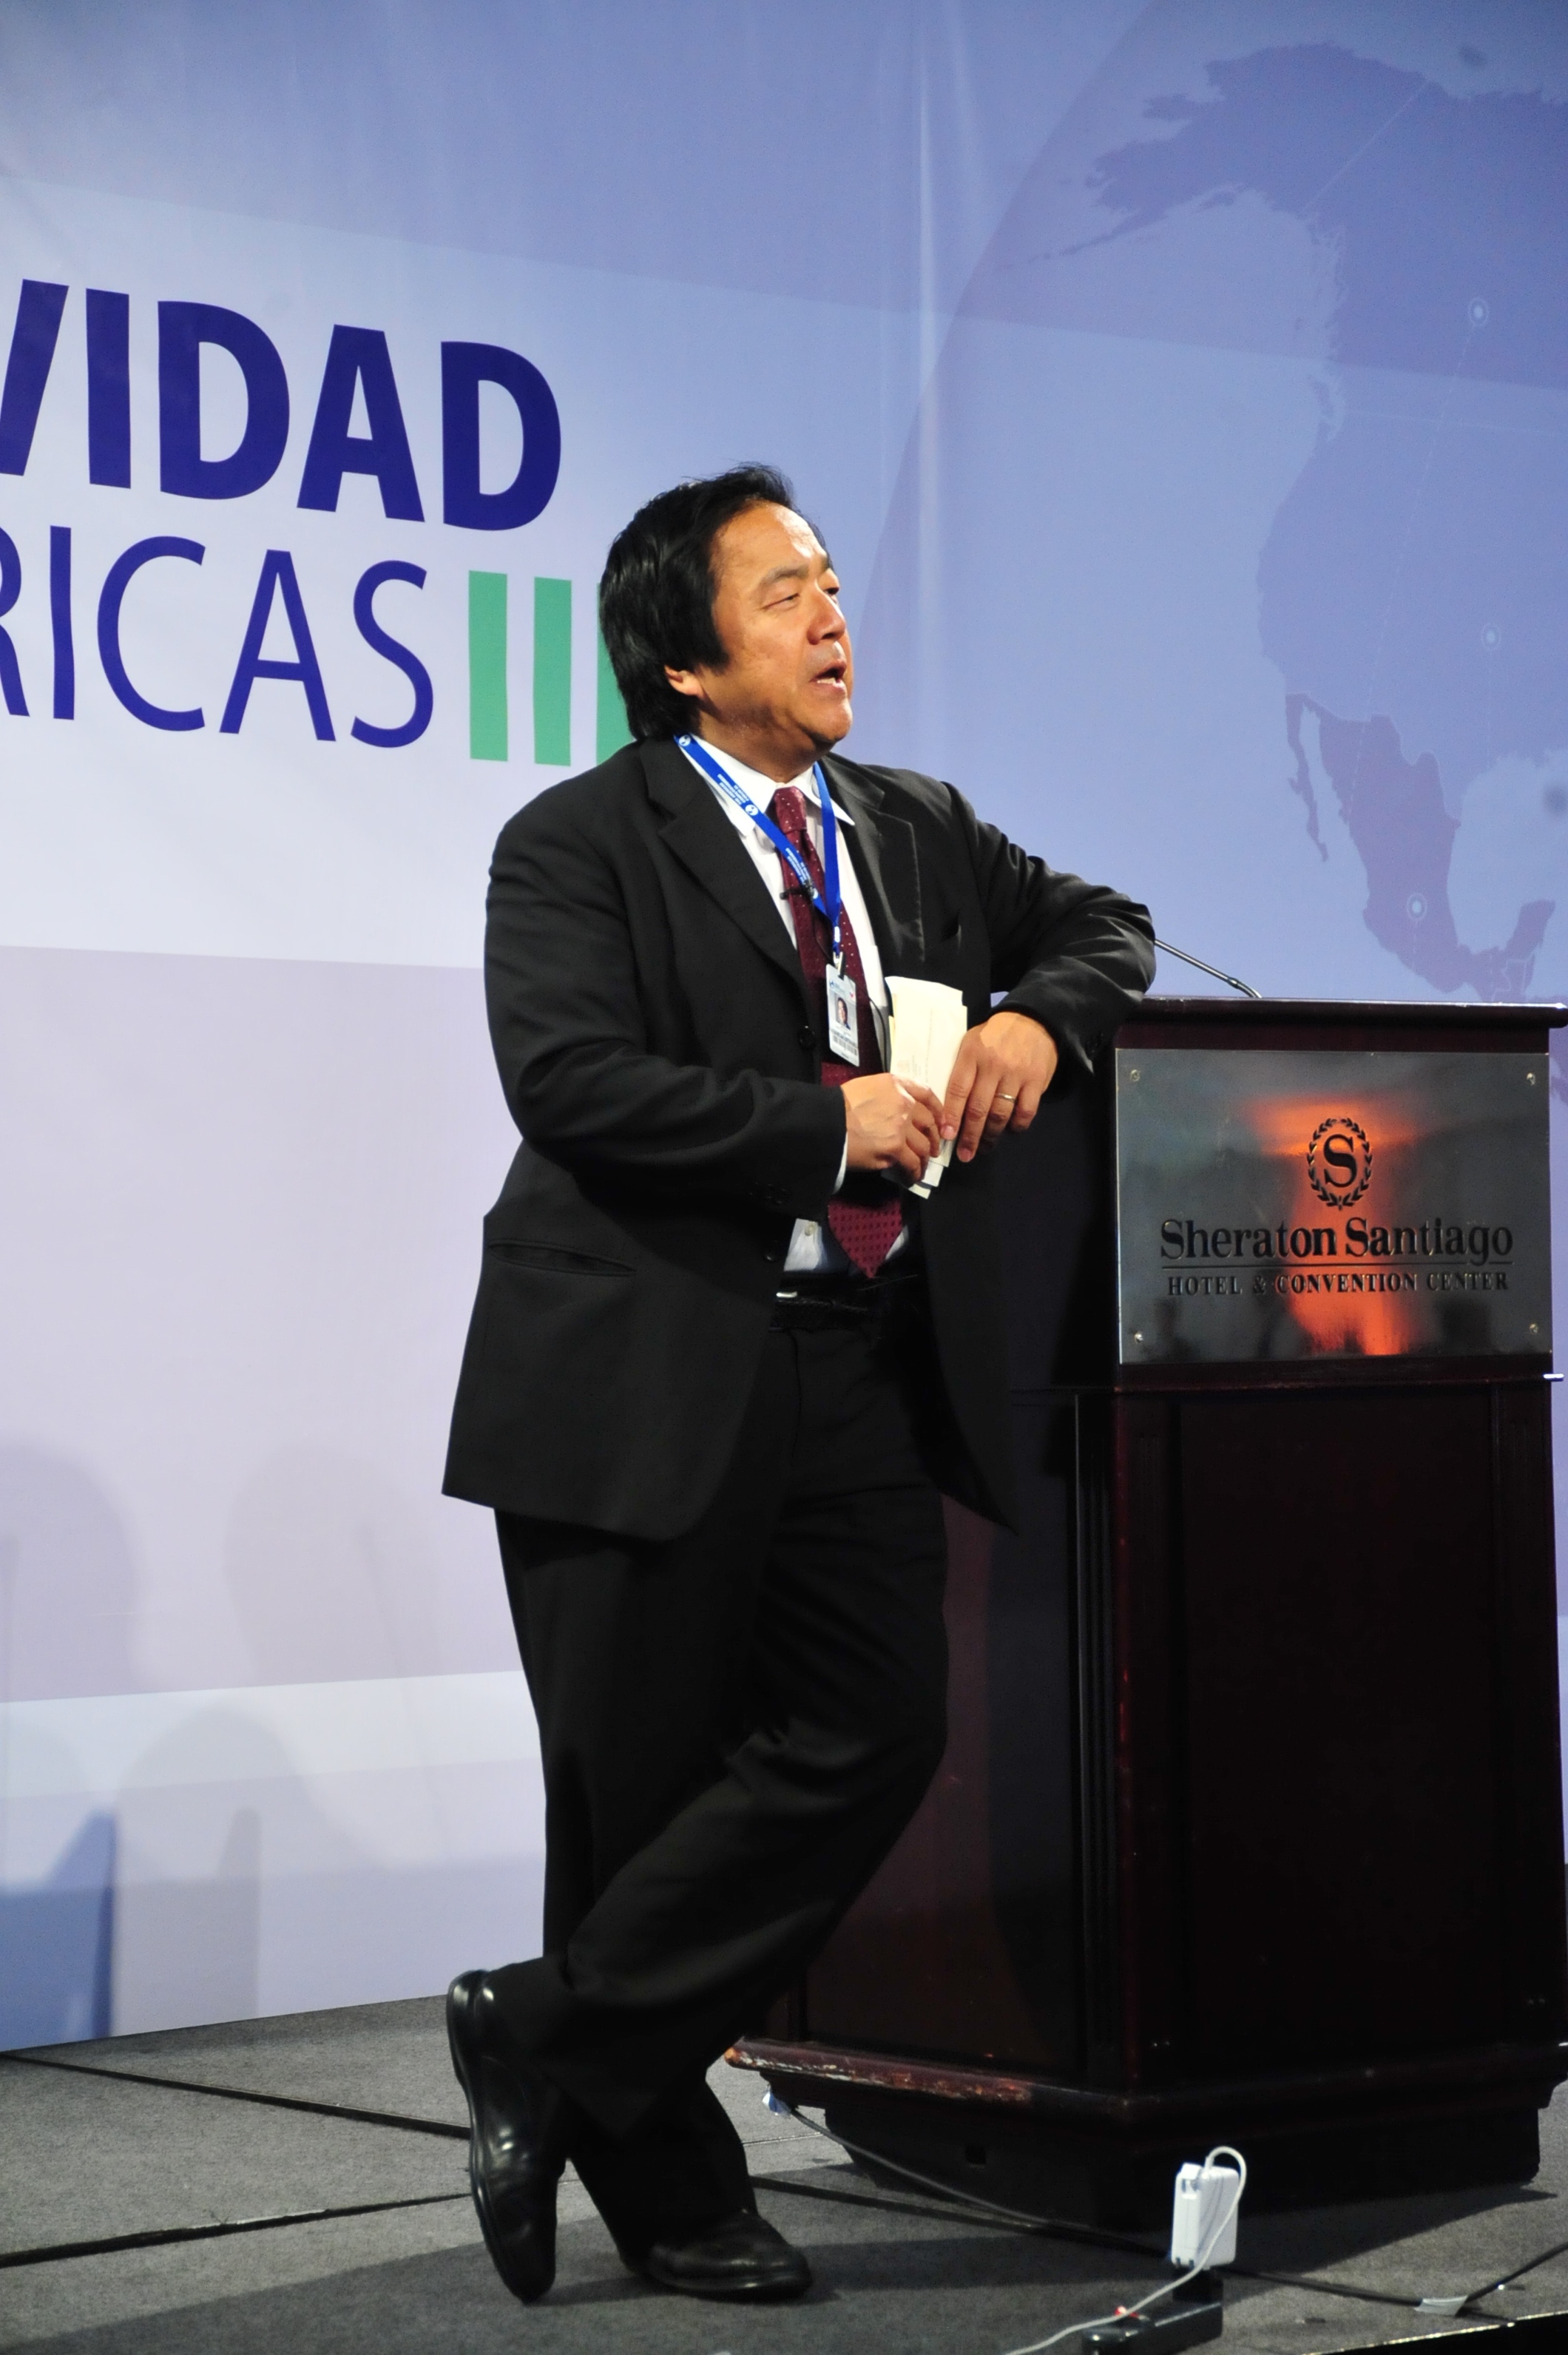 John Kao, Chairman of the Institute for Large Scale Innovation, speaks on the issues of competitiveness and innovation within the Western Hemisphere.